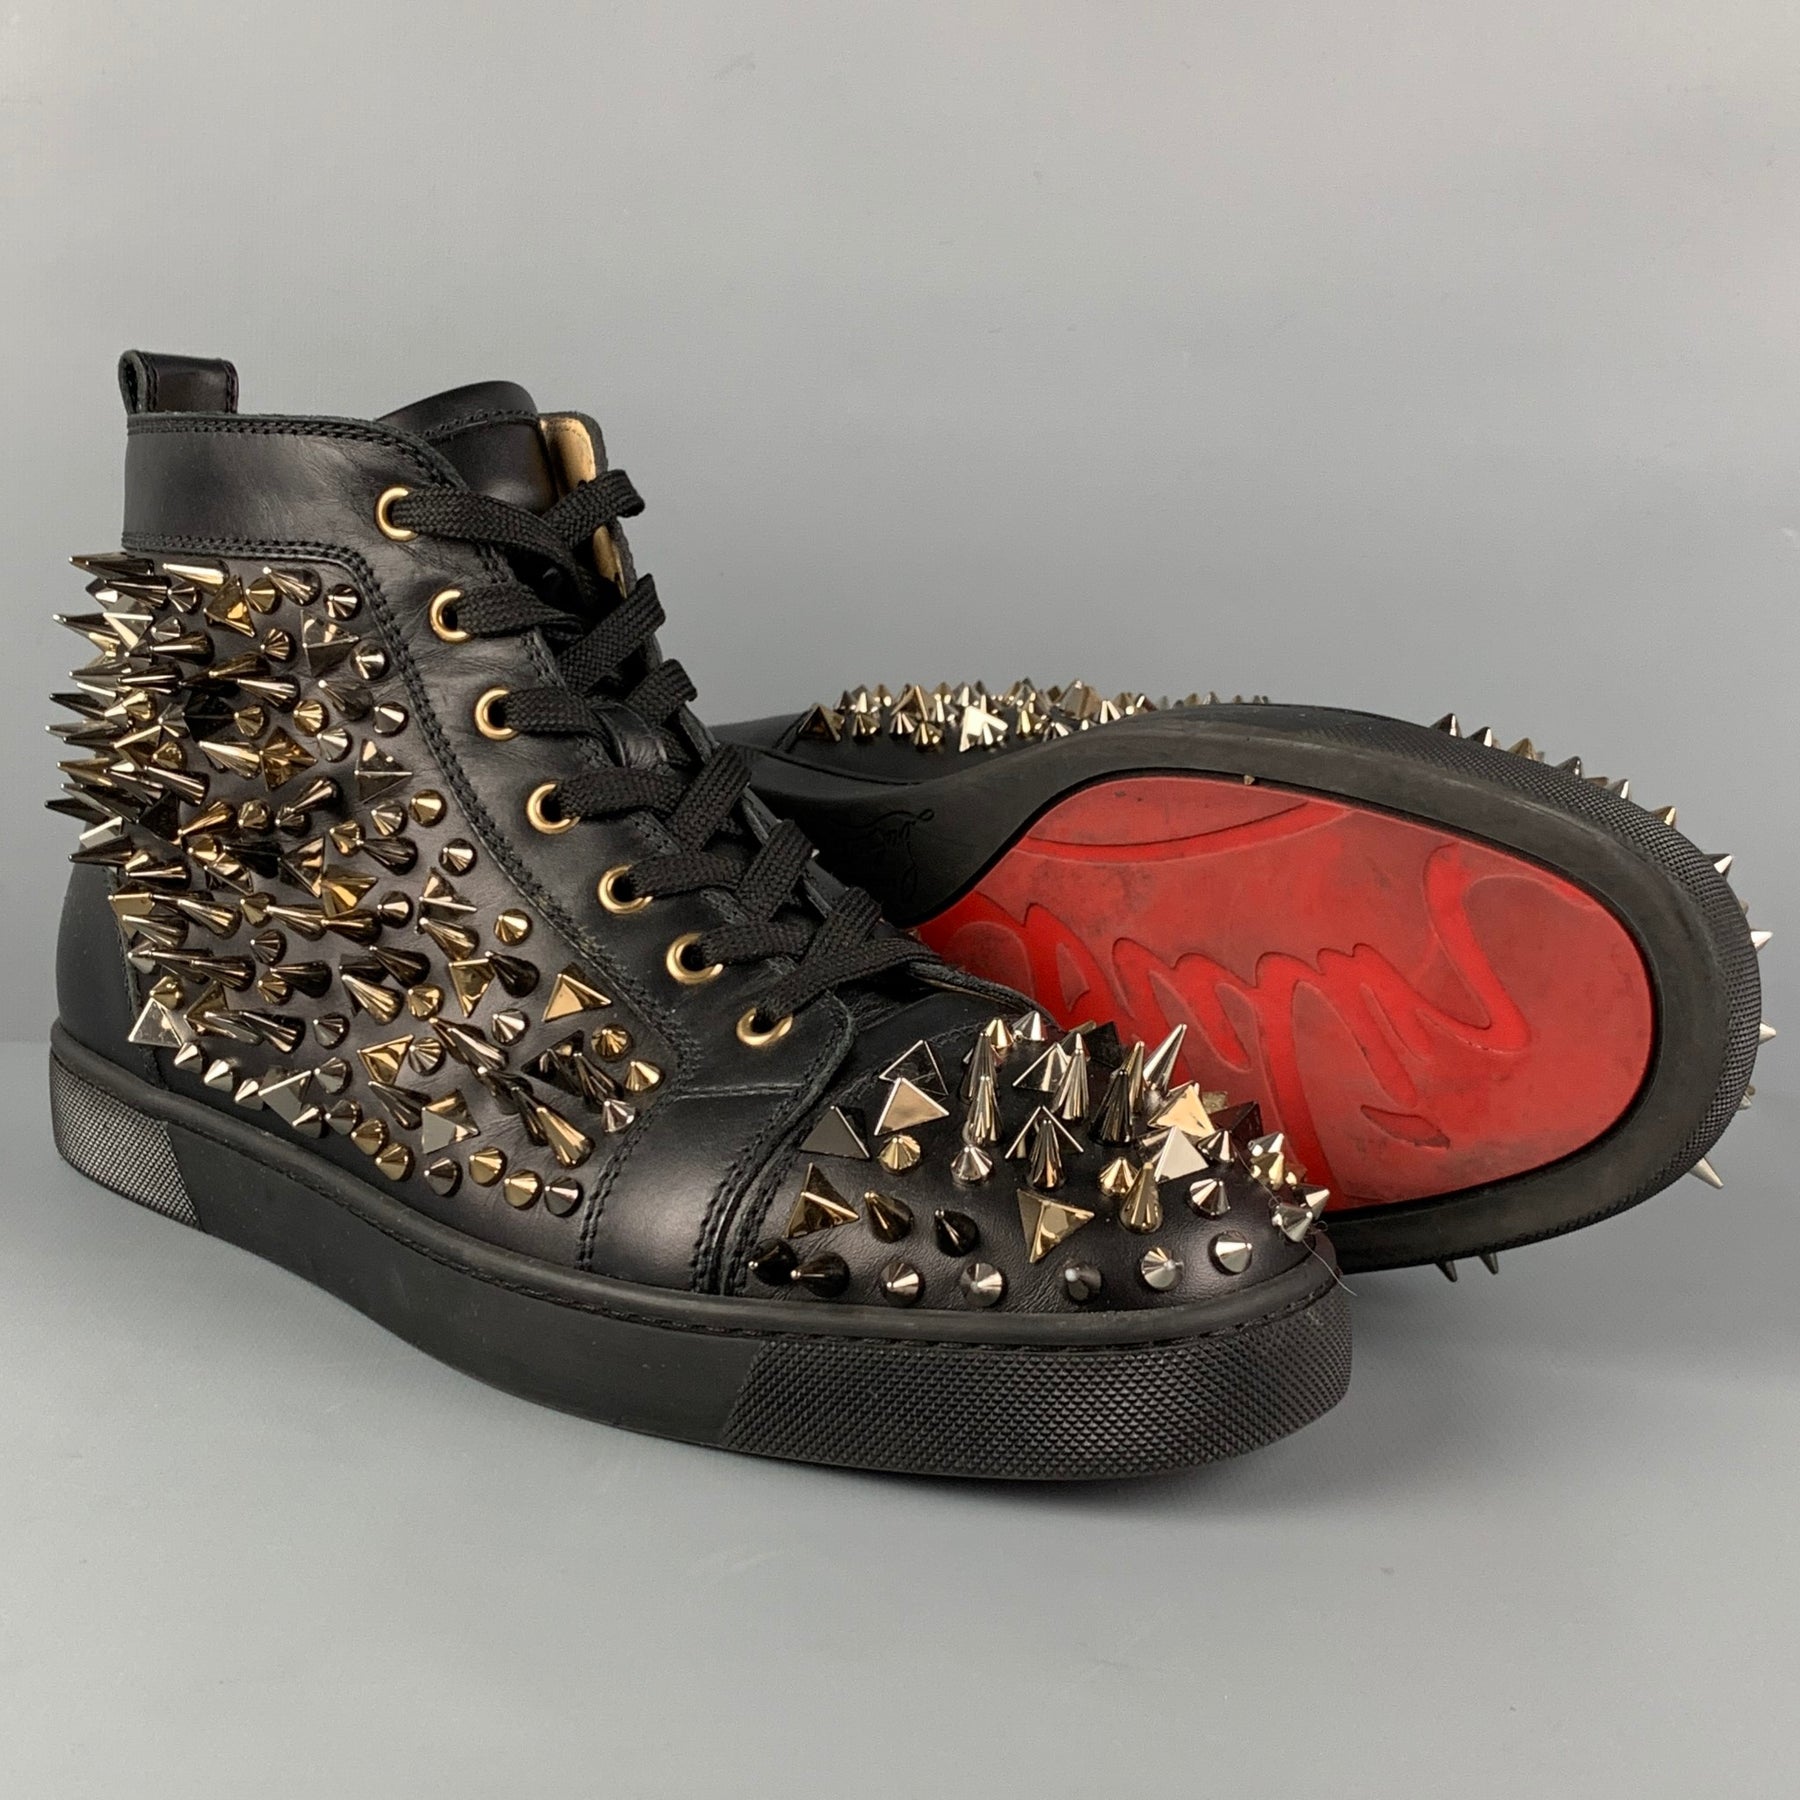 Lou spikes trainers Christian Louboutin Black size 38.5 EU in Suede -  32247313